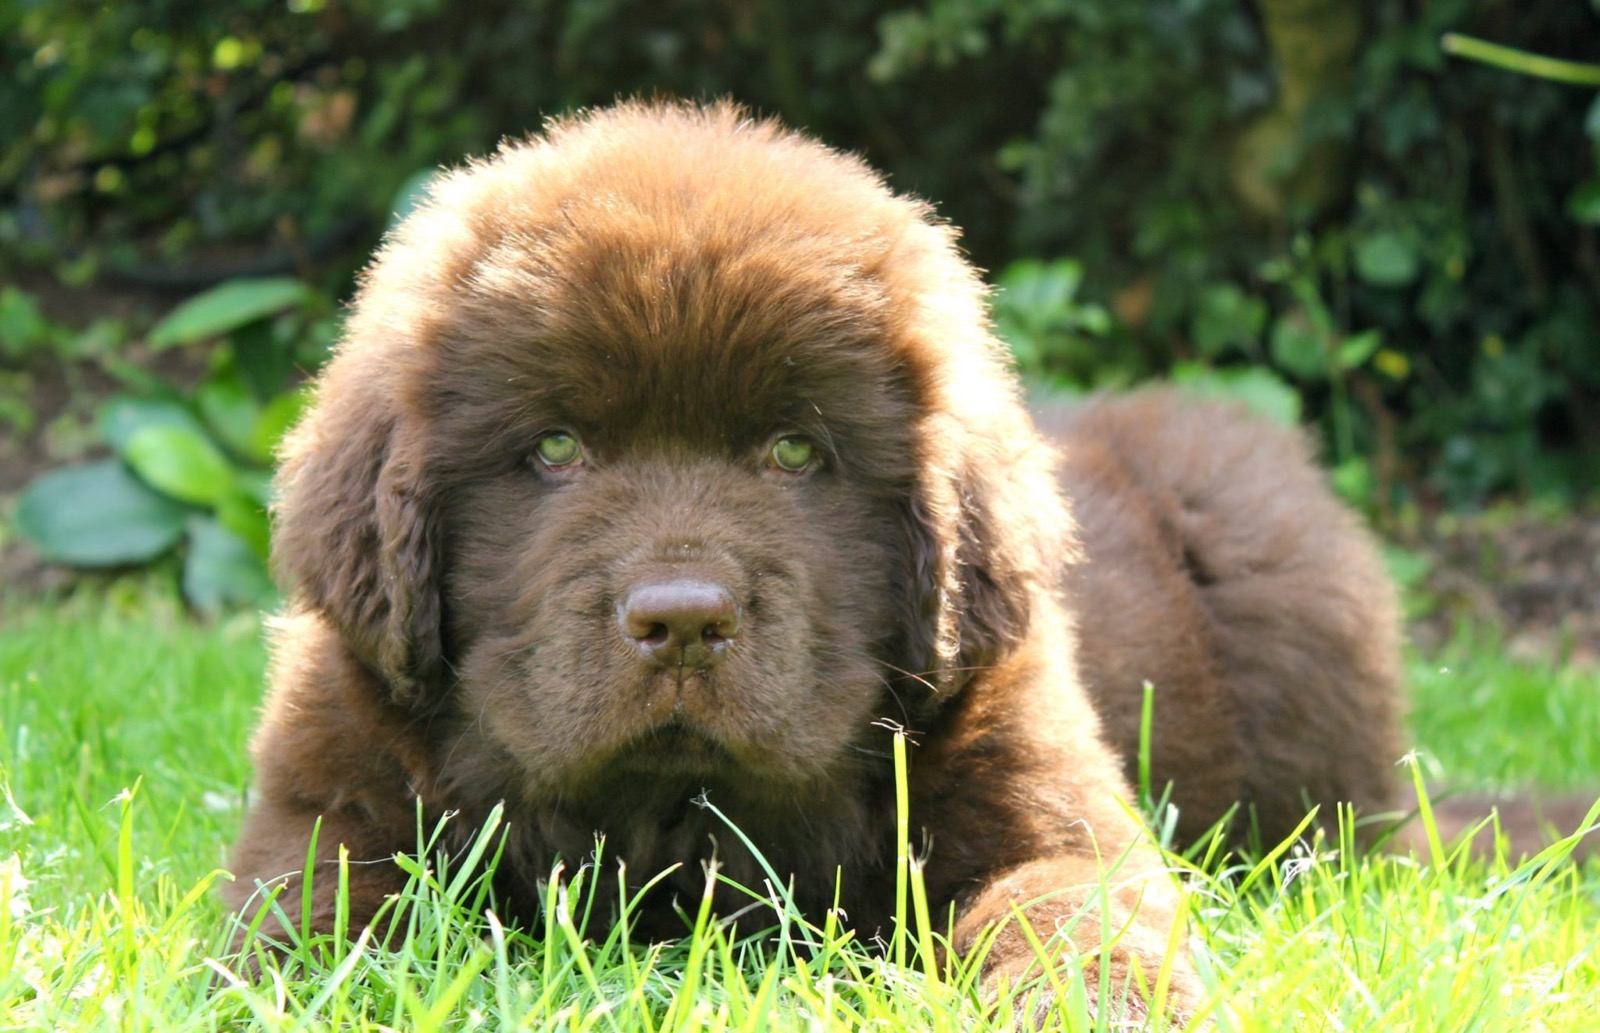 This 🐕 Dog Breeds Quiz May Be a Liiiittle Challenging, But Let’s See If You Can Score 15/20 Newfoundland Puppy